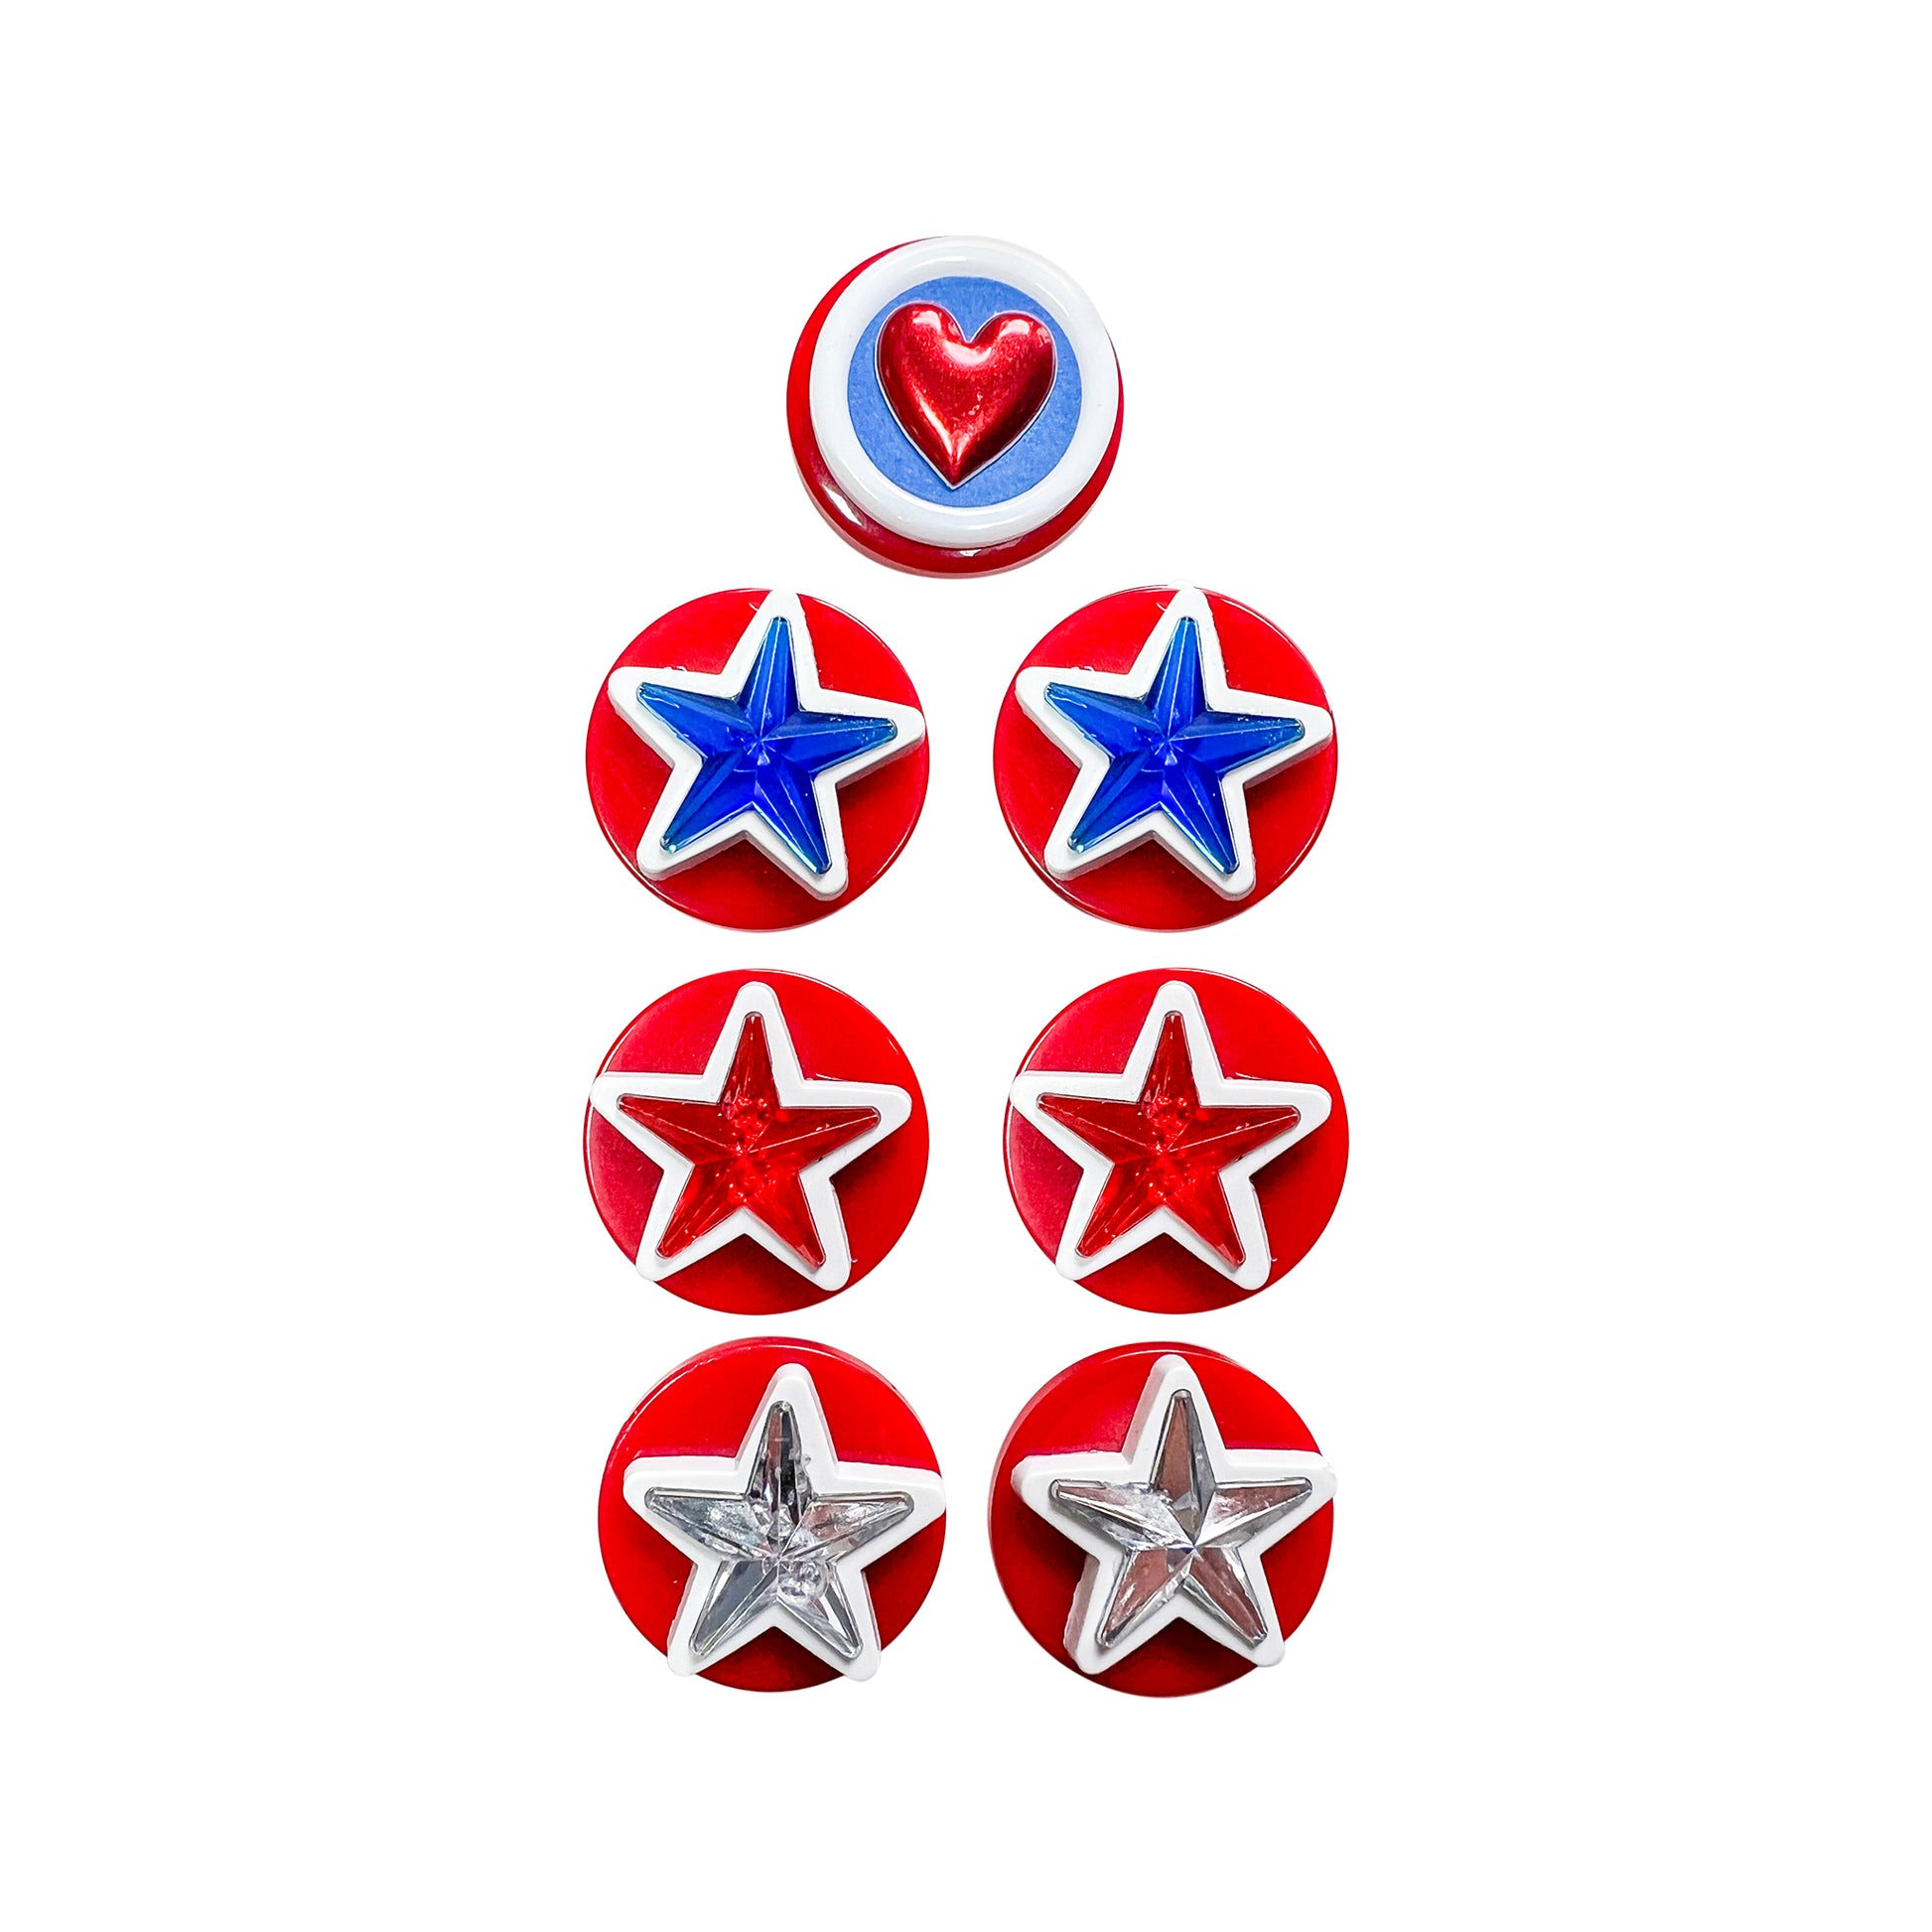 Glass Wrappings' set of 7 red button embellishments, 6 topped with pairs of red, silver, and blue gem stars, and 1 with a red heart.